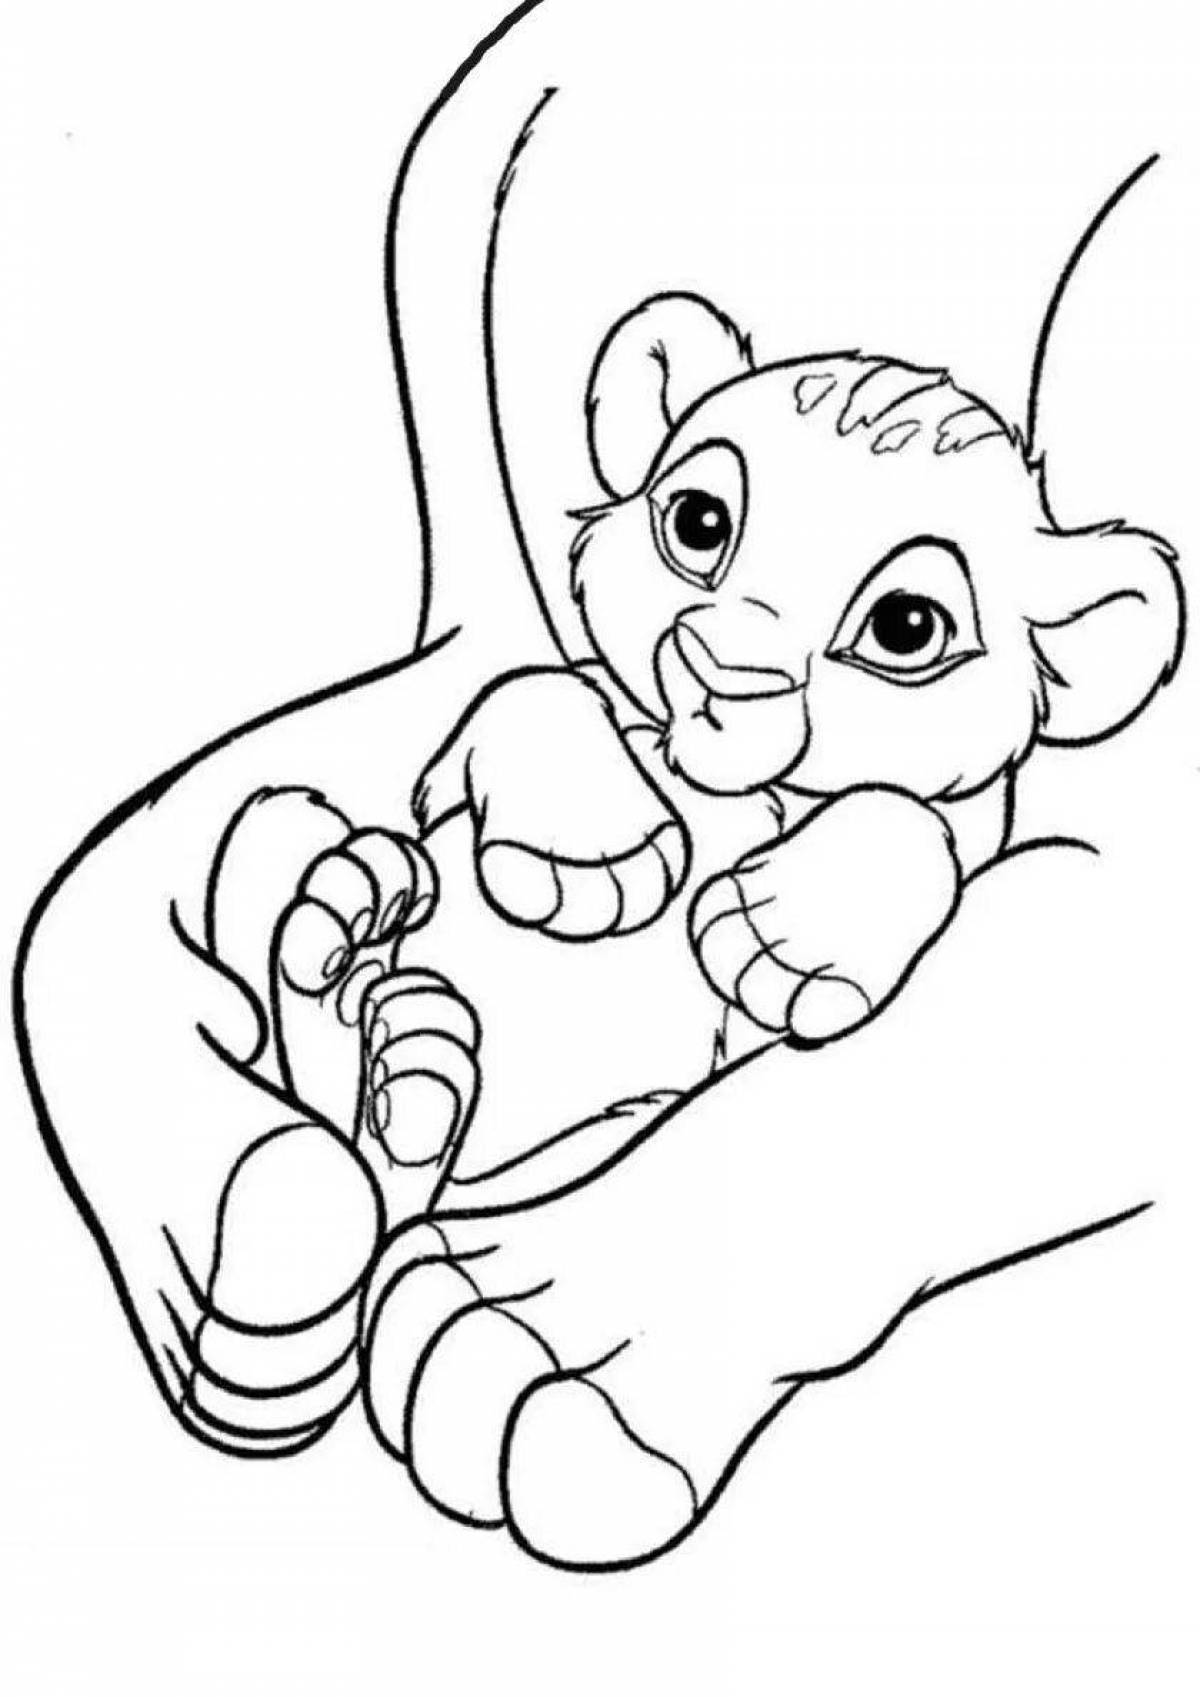 Lion King coloring book for kids